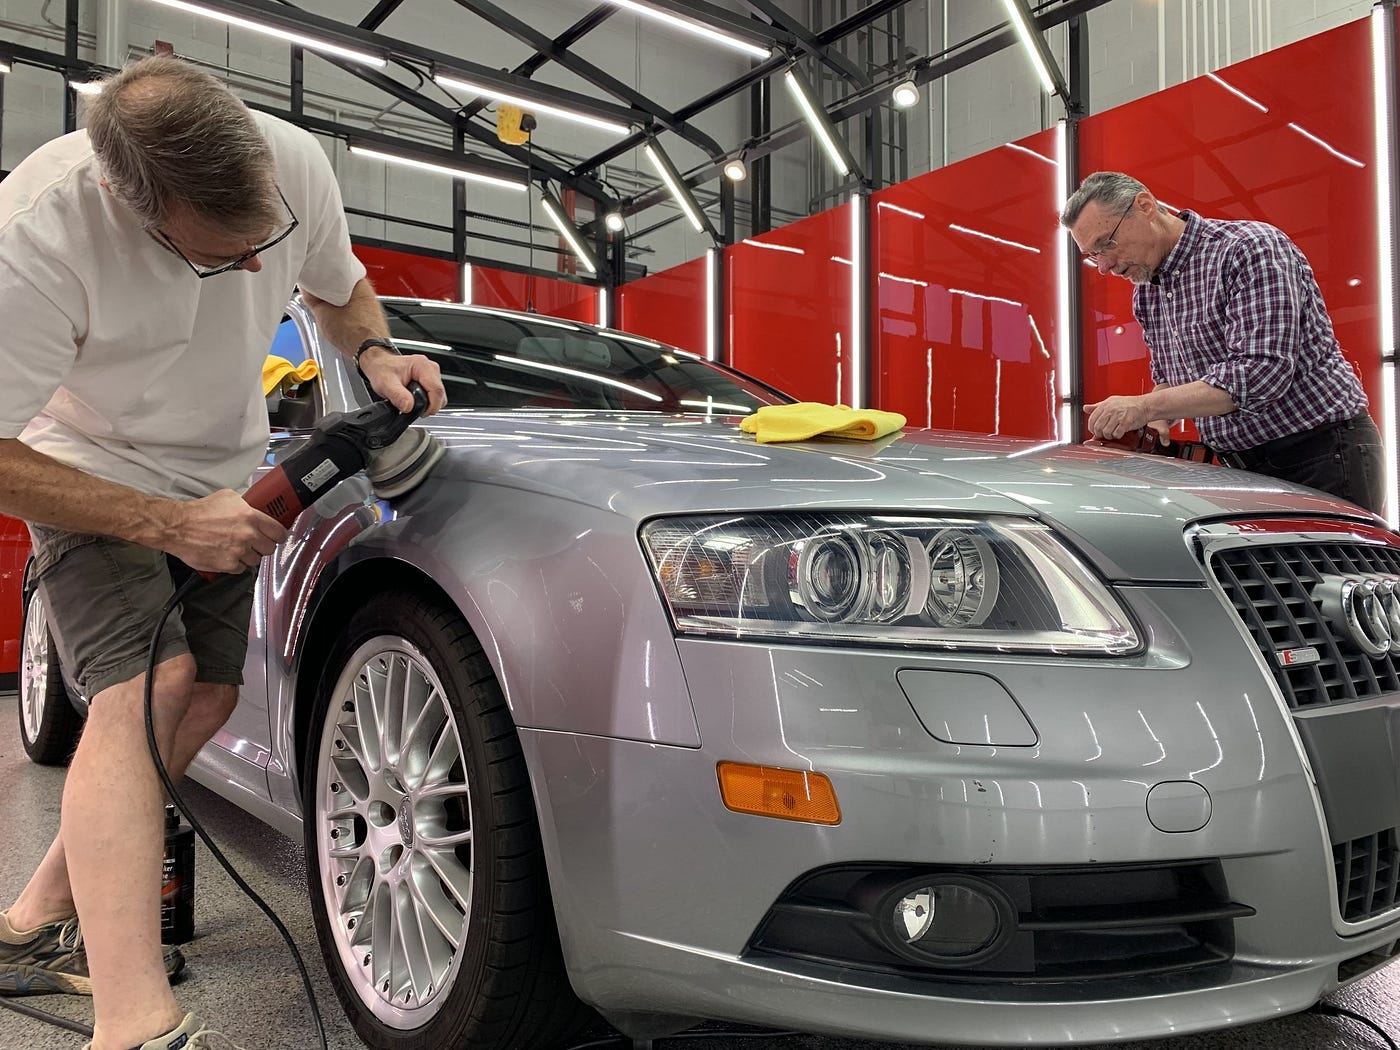 Car Detailing Training and Certification